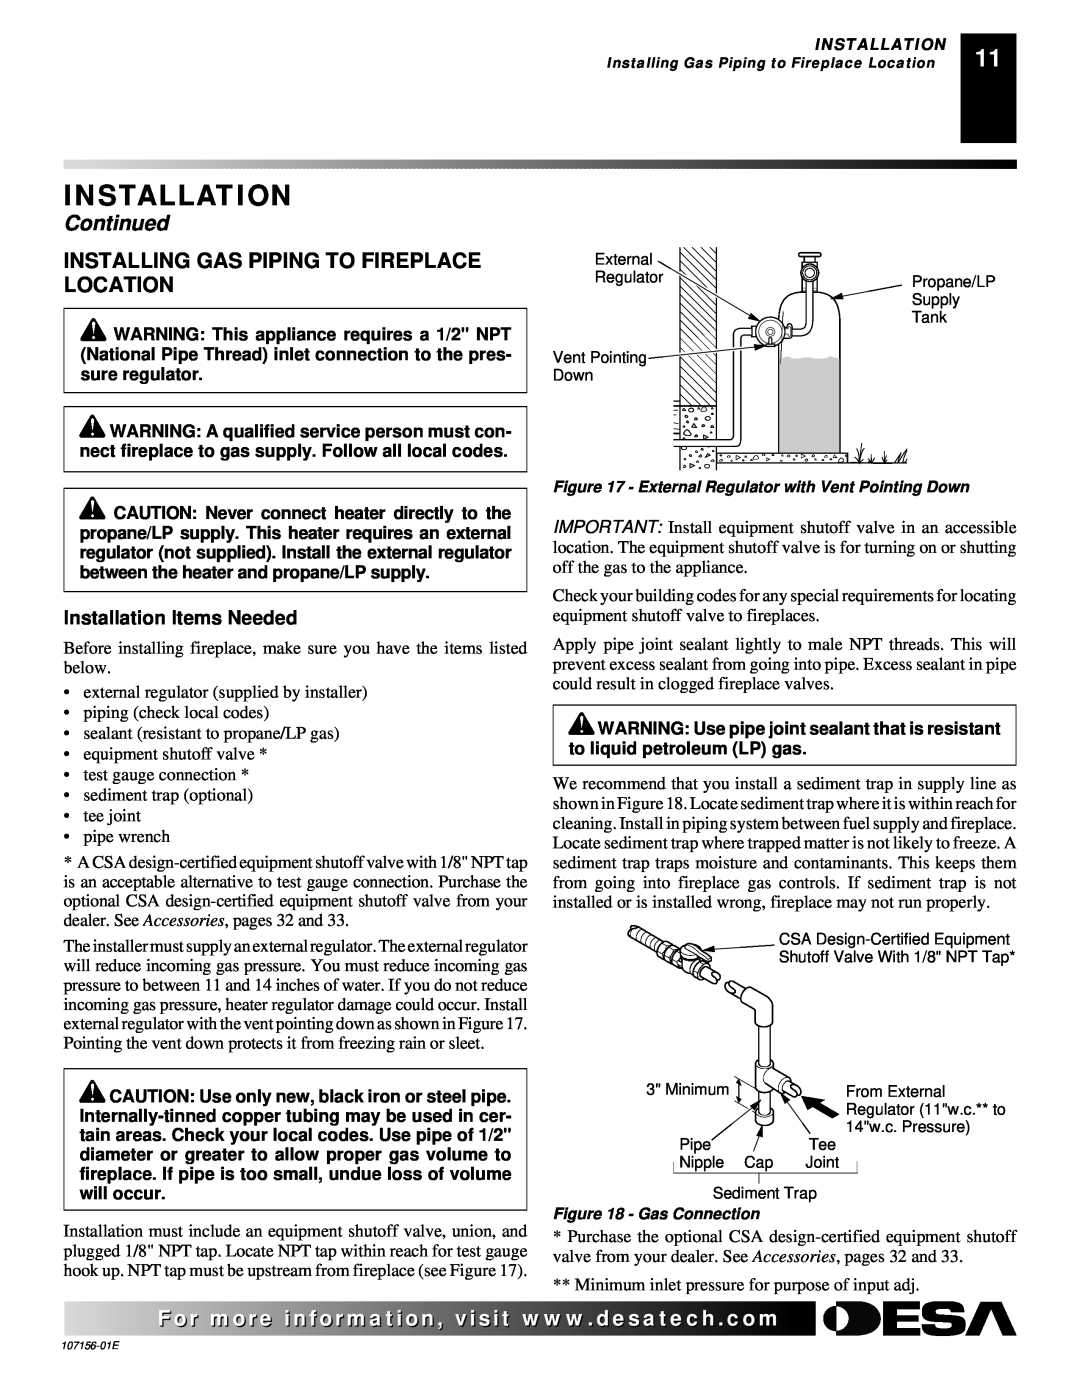 Vanguard Heating 107156-01E.pdf Installing Gas Piping To Fireplace Location, Installation Items Needed, Continued 